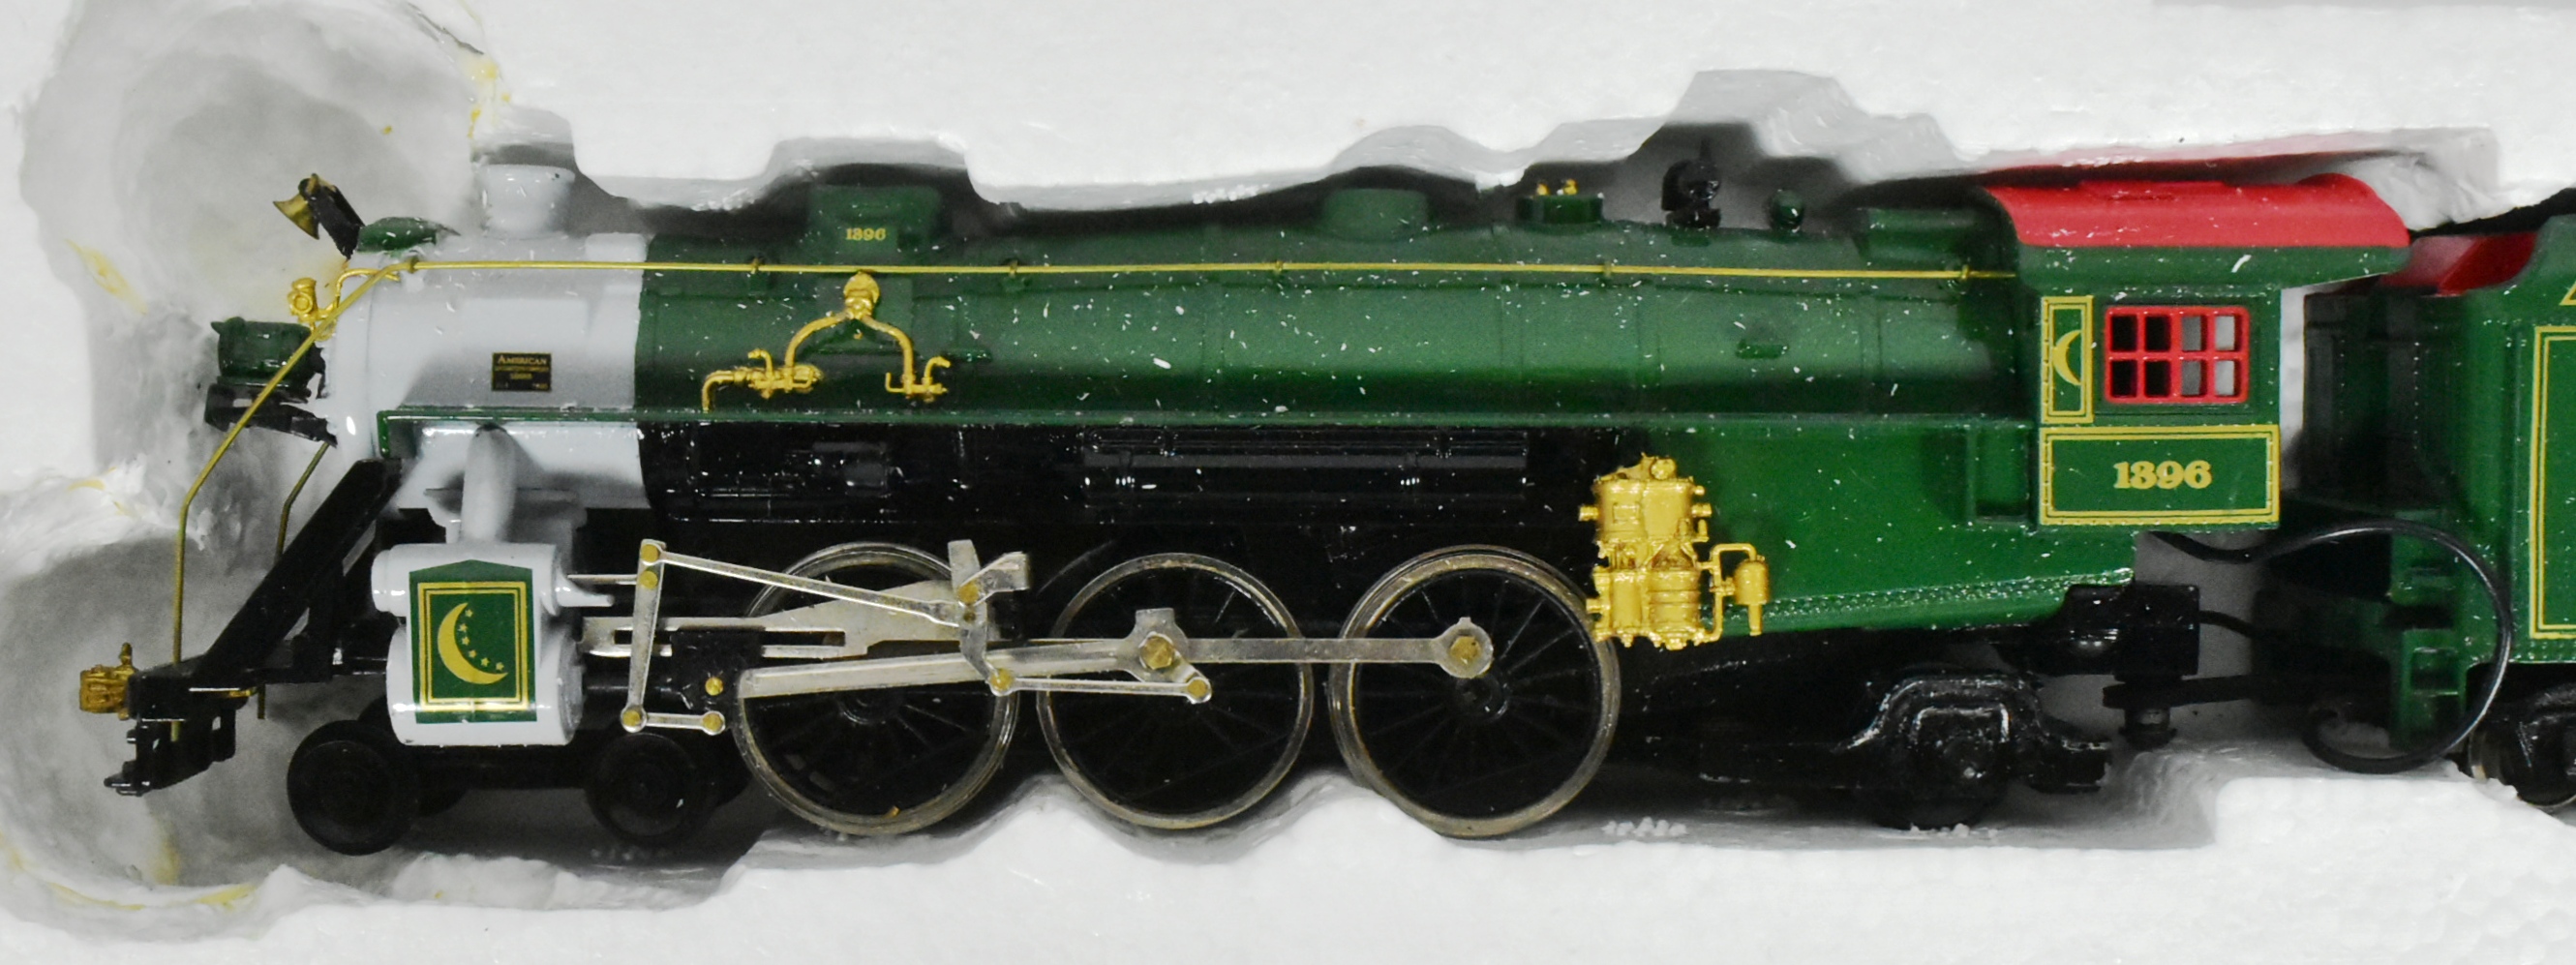 MATCHBOX COLLECTIBLES - CRESCENT LIMITED - H0 SCALE MODEL TRAIN - Image 2 of 4